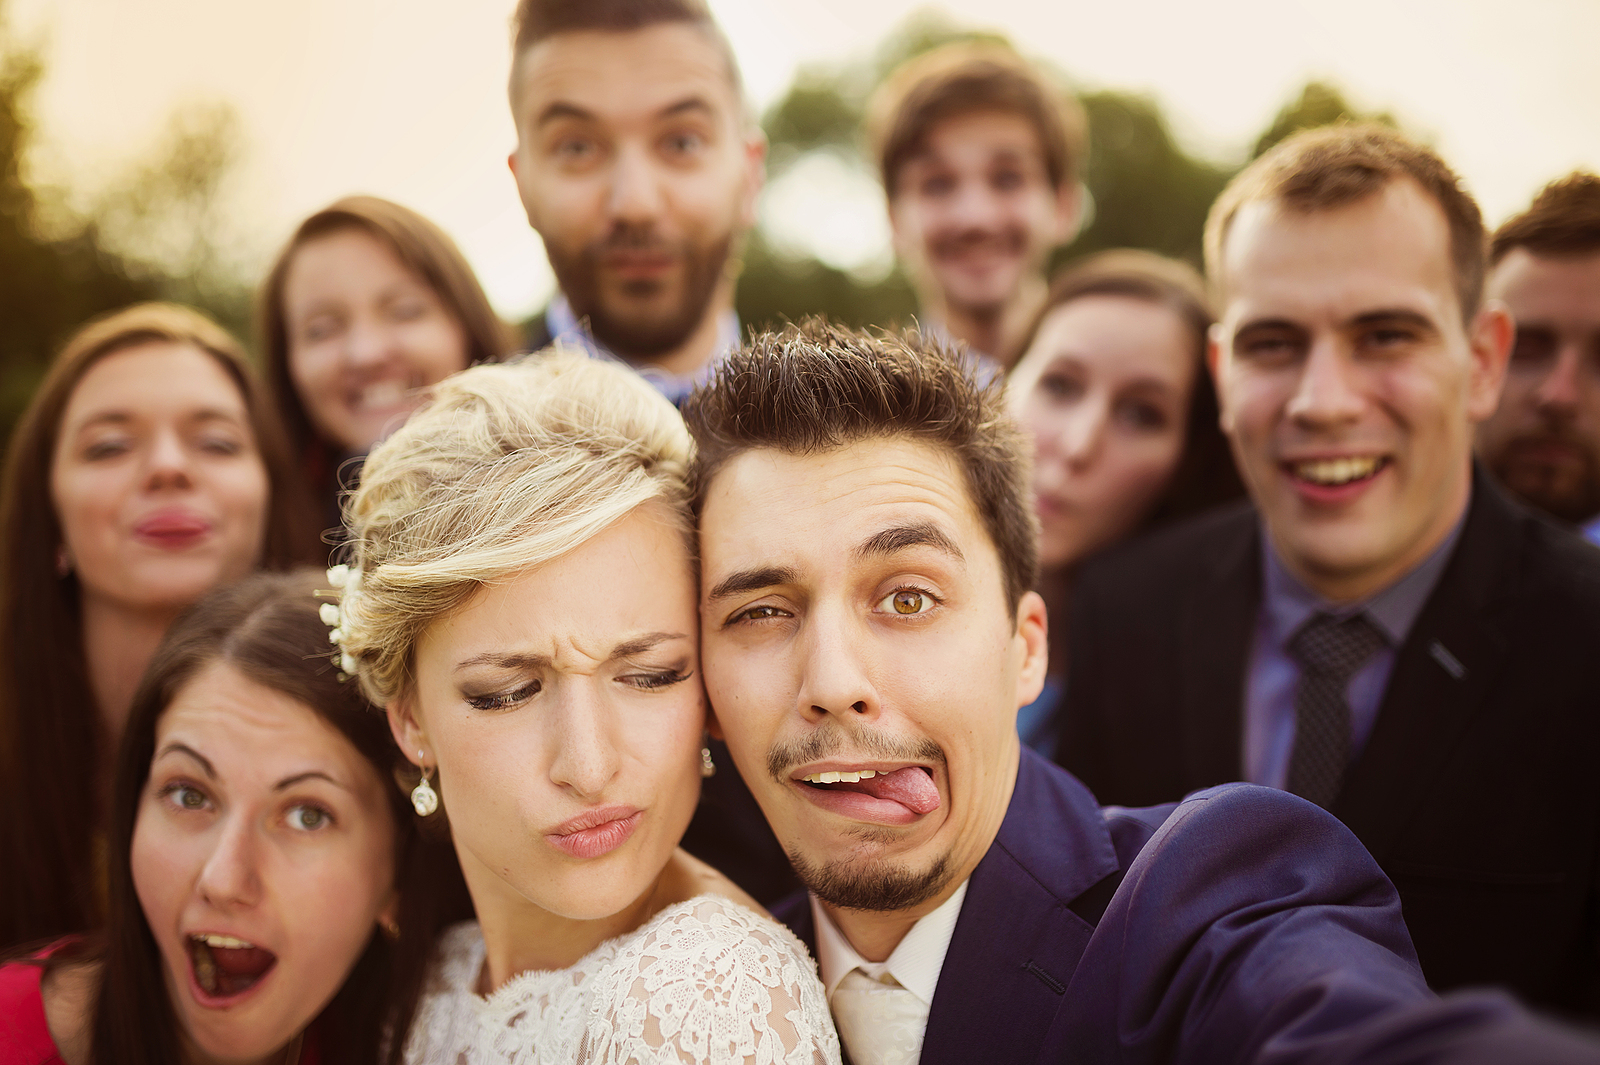 A bride and groom making silly faces in the camera with a group of friends smiling in the background